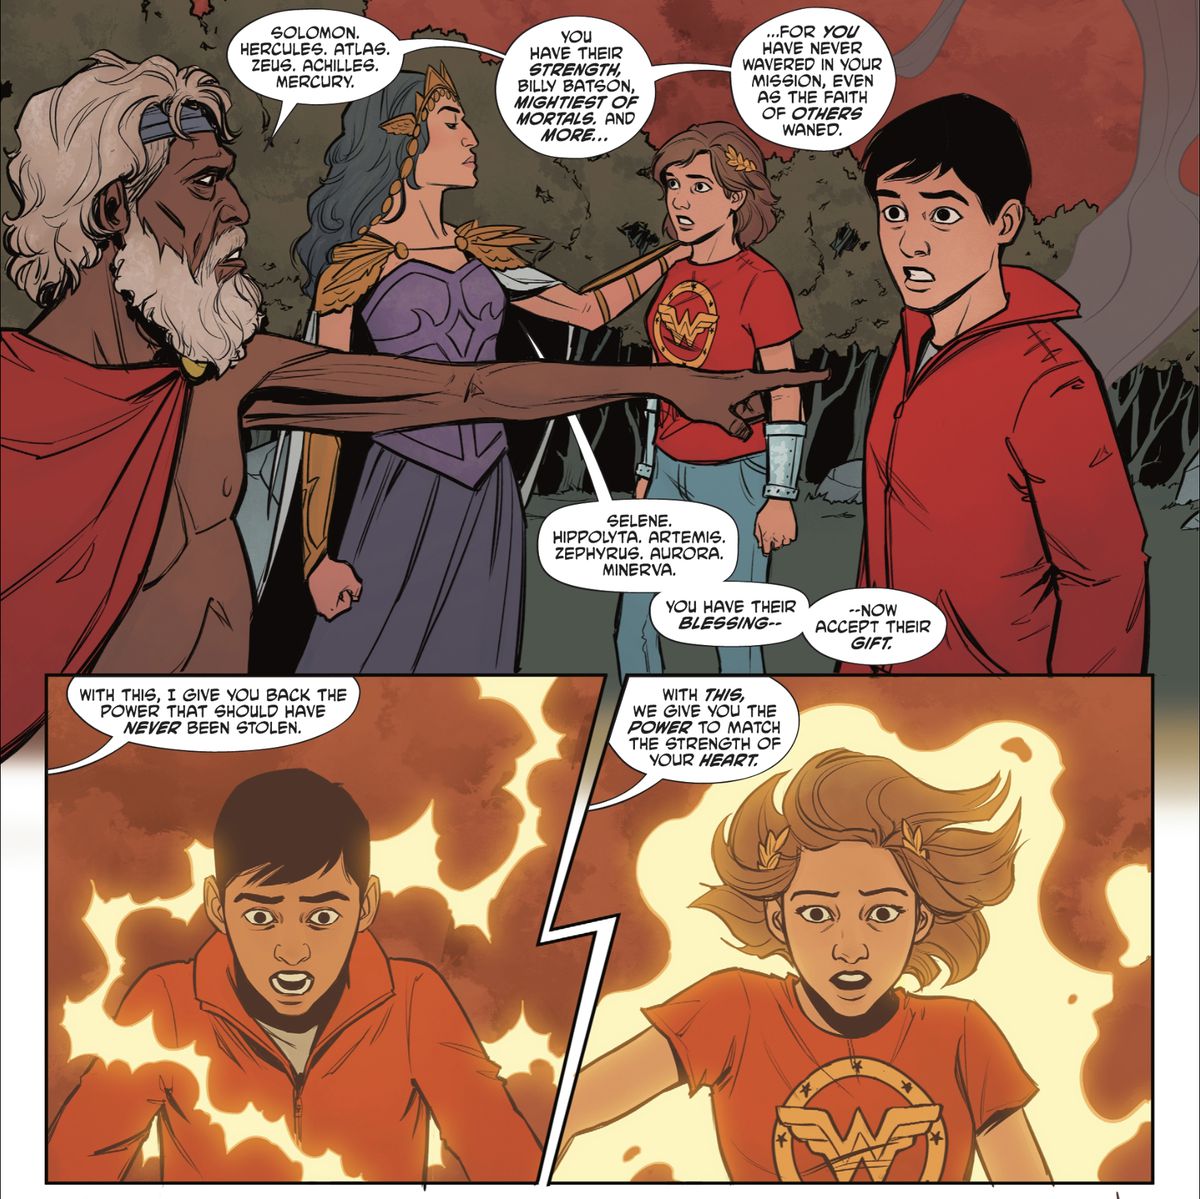 The wizard Shazam re-endows Billy with the powers of Solomon, Hercules, Atlas, Zeus, Achilles, and Mercury; as the goddess Hippolyta of the Amazons endows his sister Mary with the powers of Selene, Hippolyta, Artemis, Zephyrus, Auroro, and Minerva. Each of the kids crackles with yellow lightning energy in Lazarus Planet #4: Revenge of the Gods (2023).